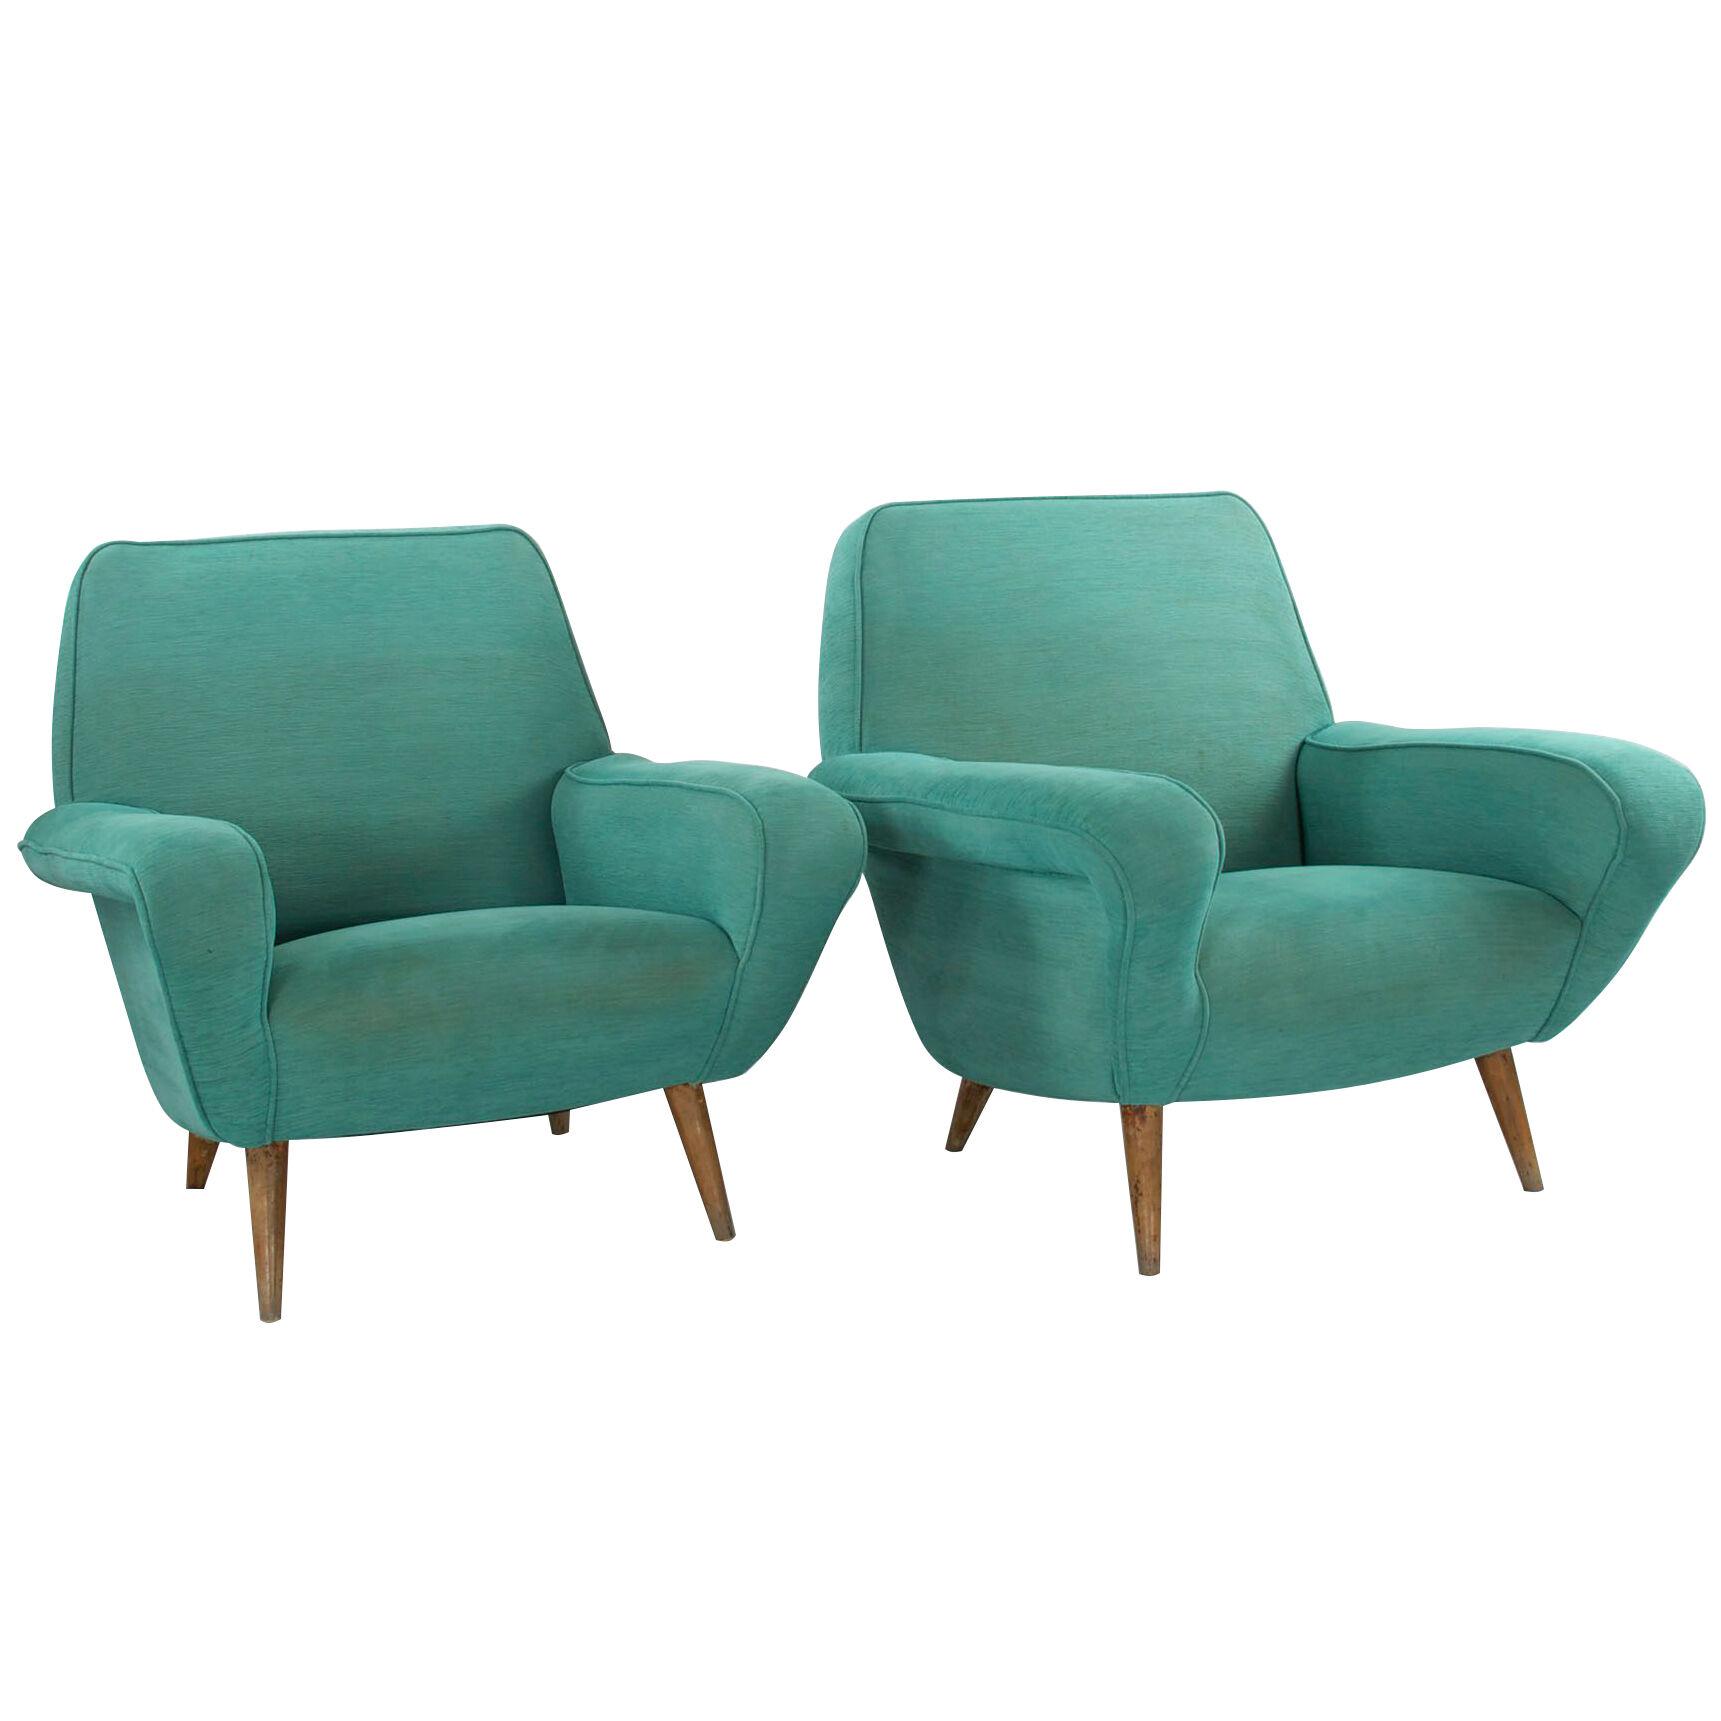 Set of 2 Gianfranco Frattini Chairs Modell 830, 1950s, Cassina, Italy